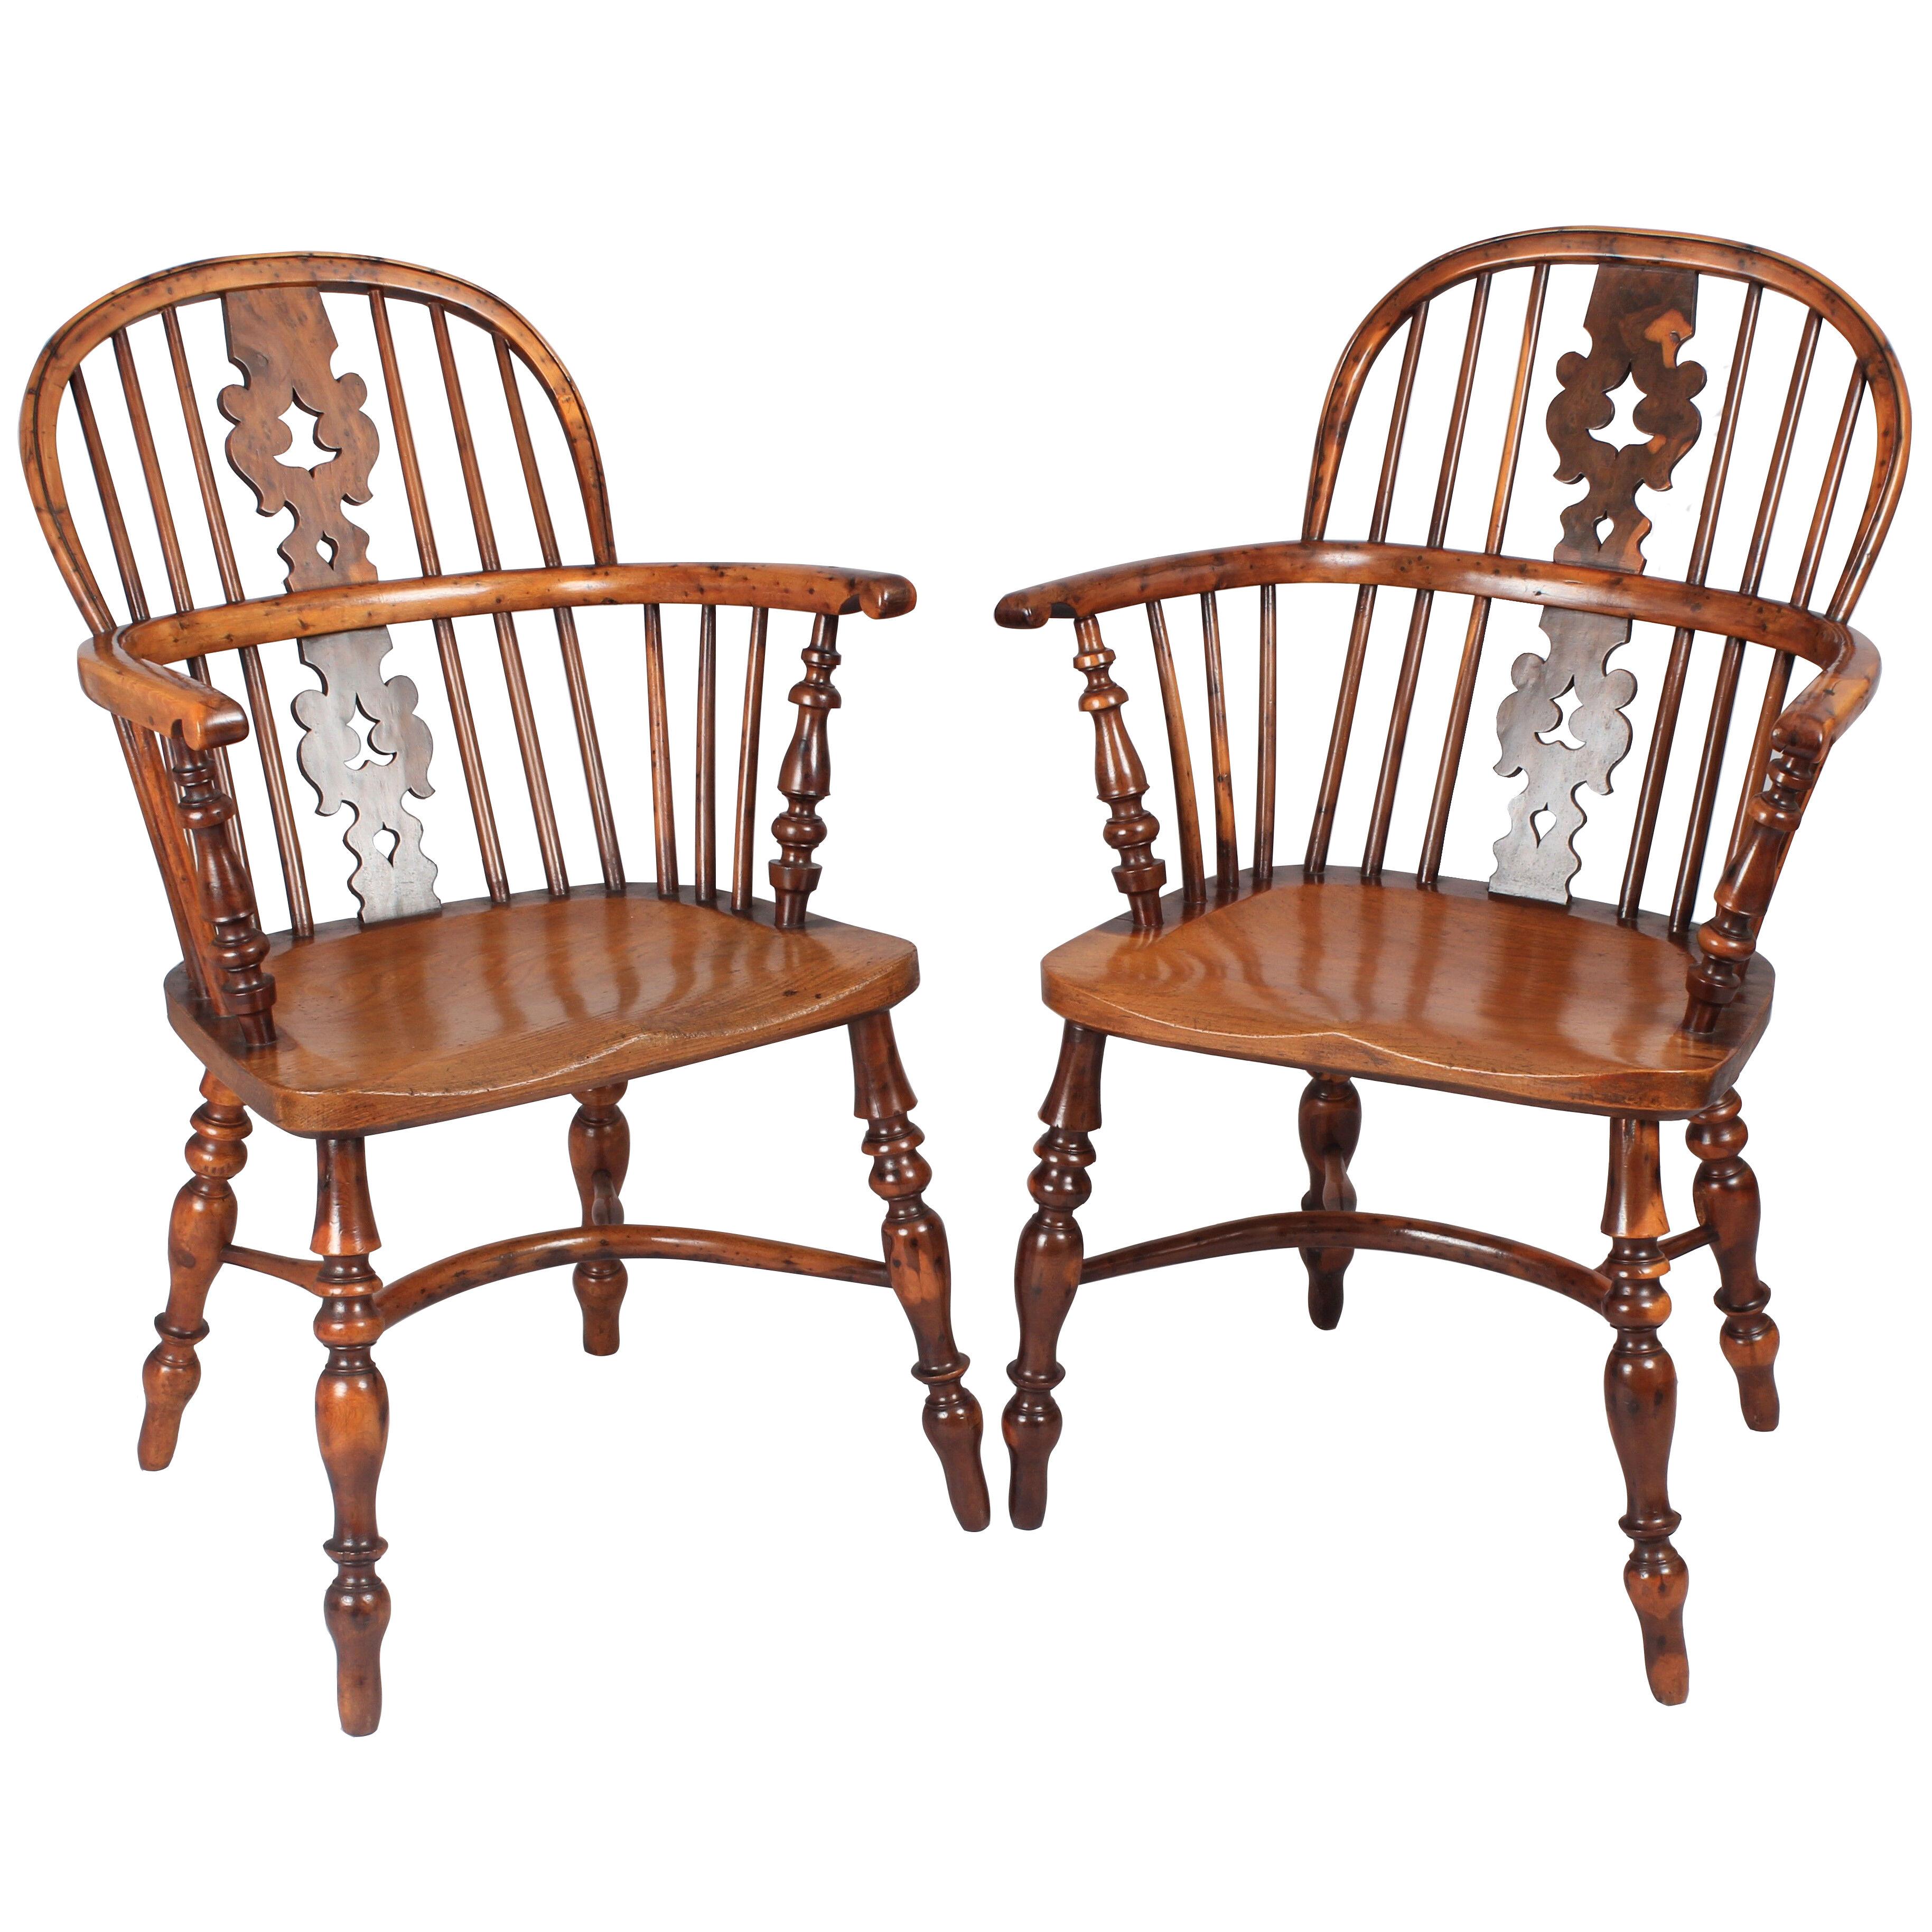 A fine pair of early 19th century yew Windsor arm chairs